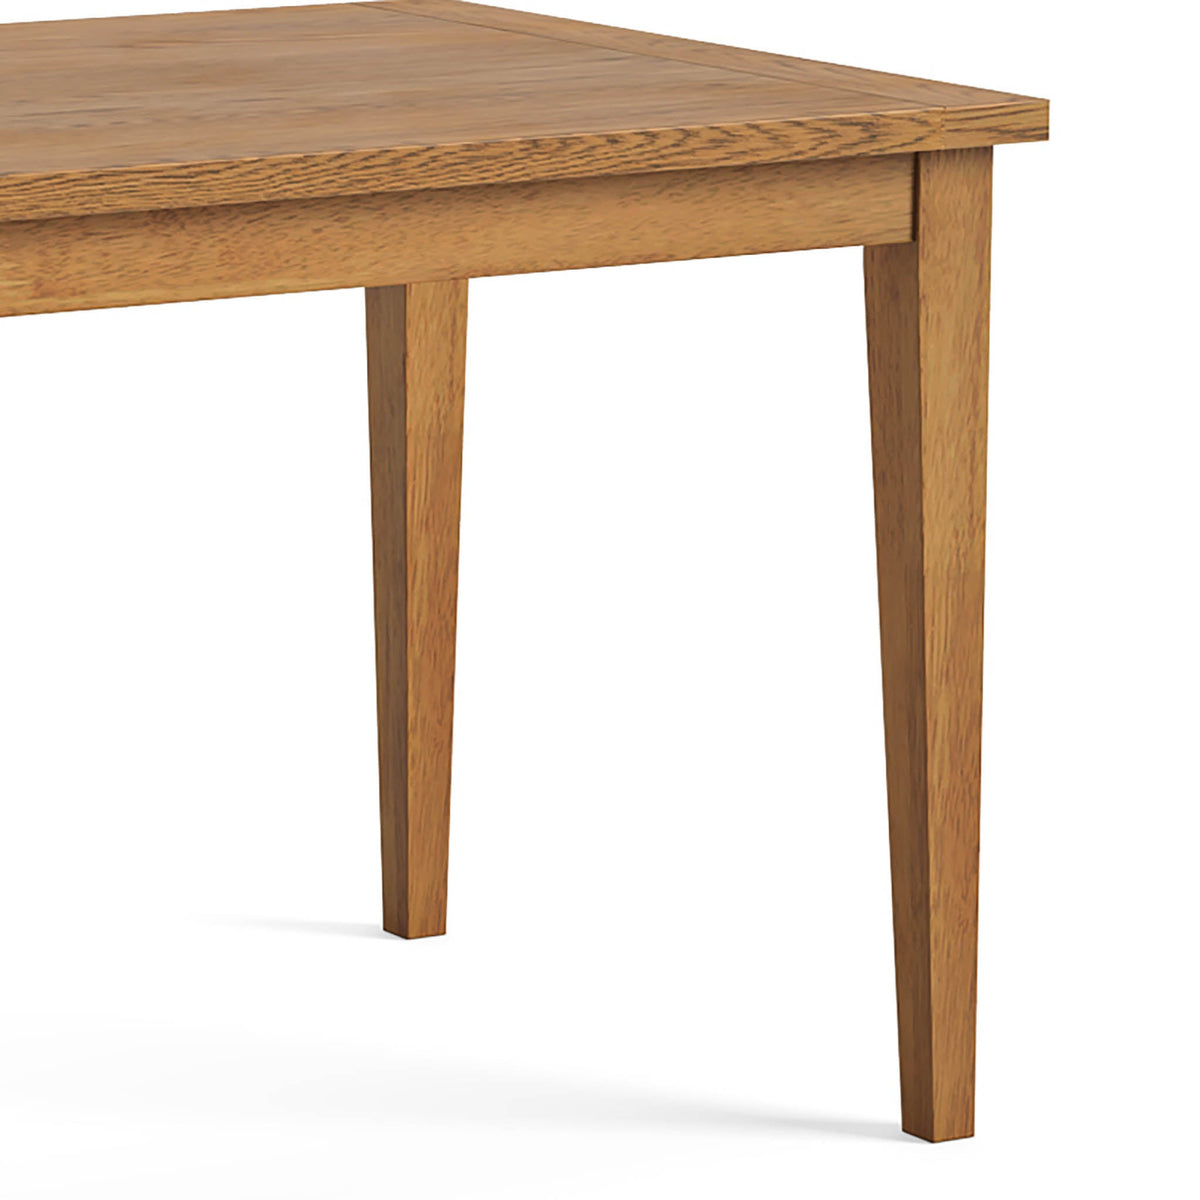 Fran Oak 120cm Dining Table close up of wooden legs